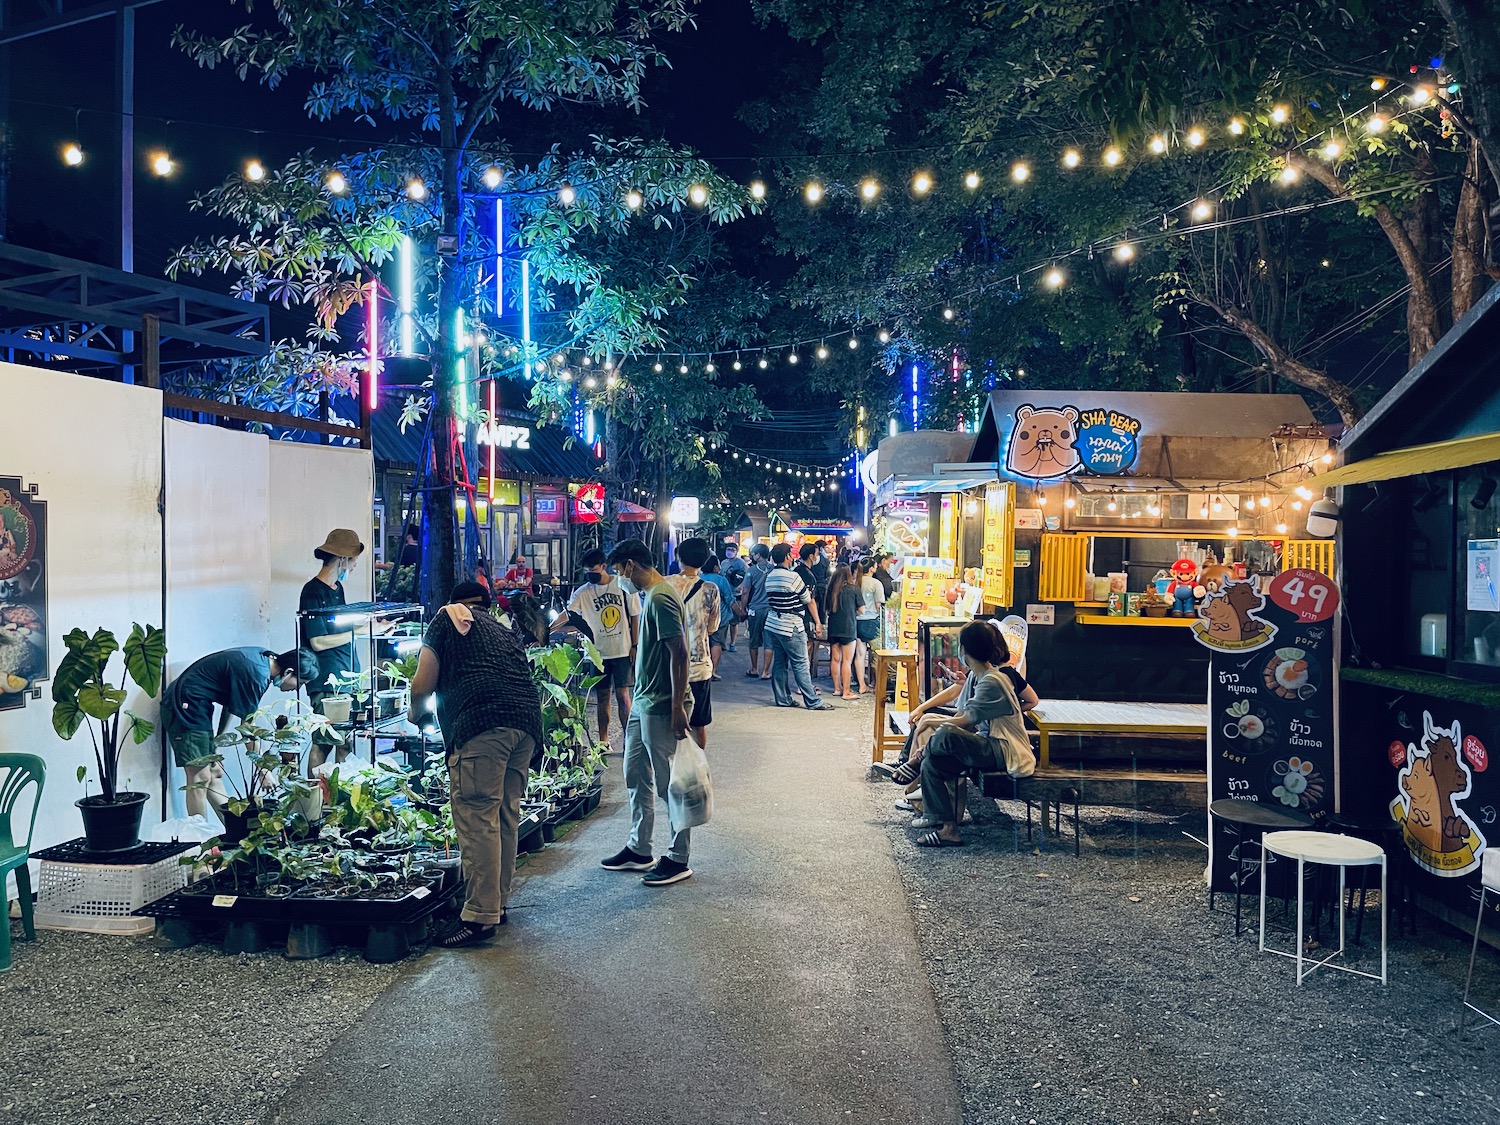 people walking on a sidewalk with food stalls and lights